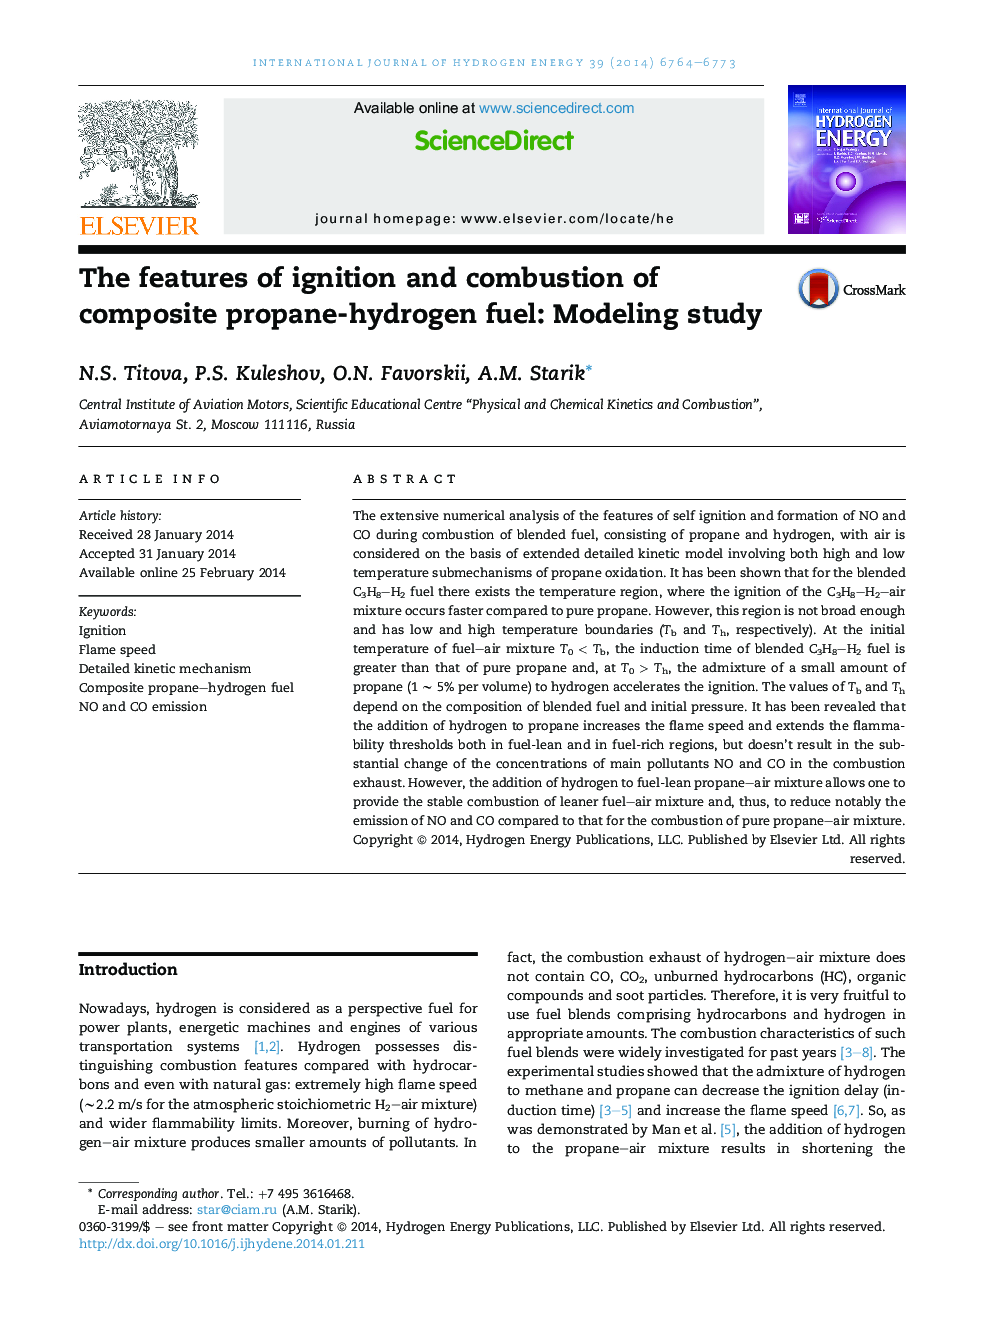 The features of ignition and combustion of composite propane-hydrogen fuel: Modeling study